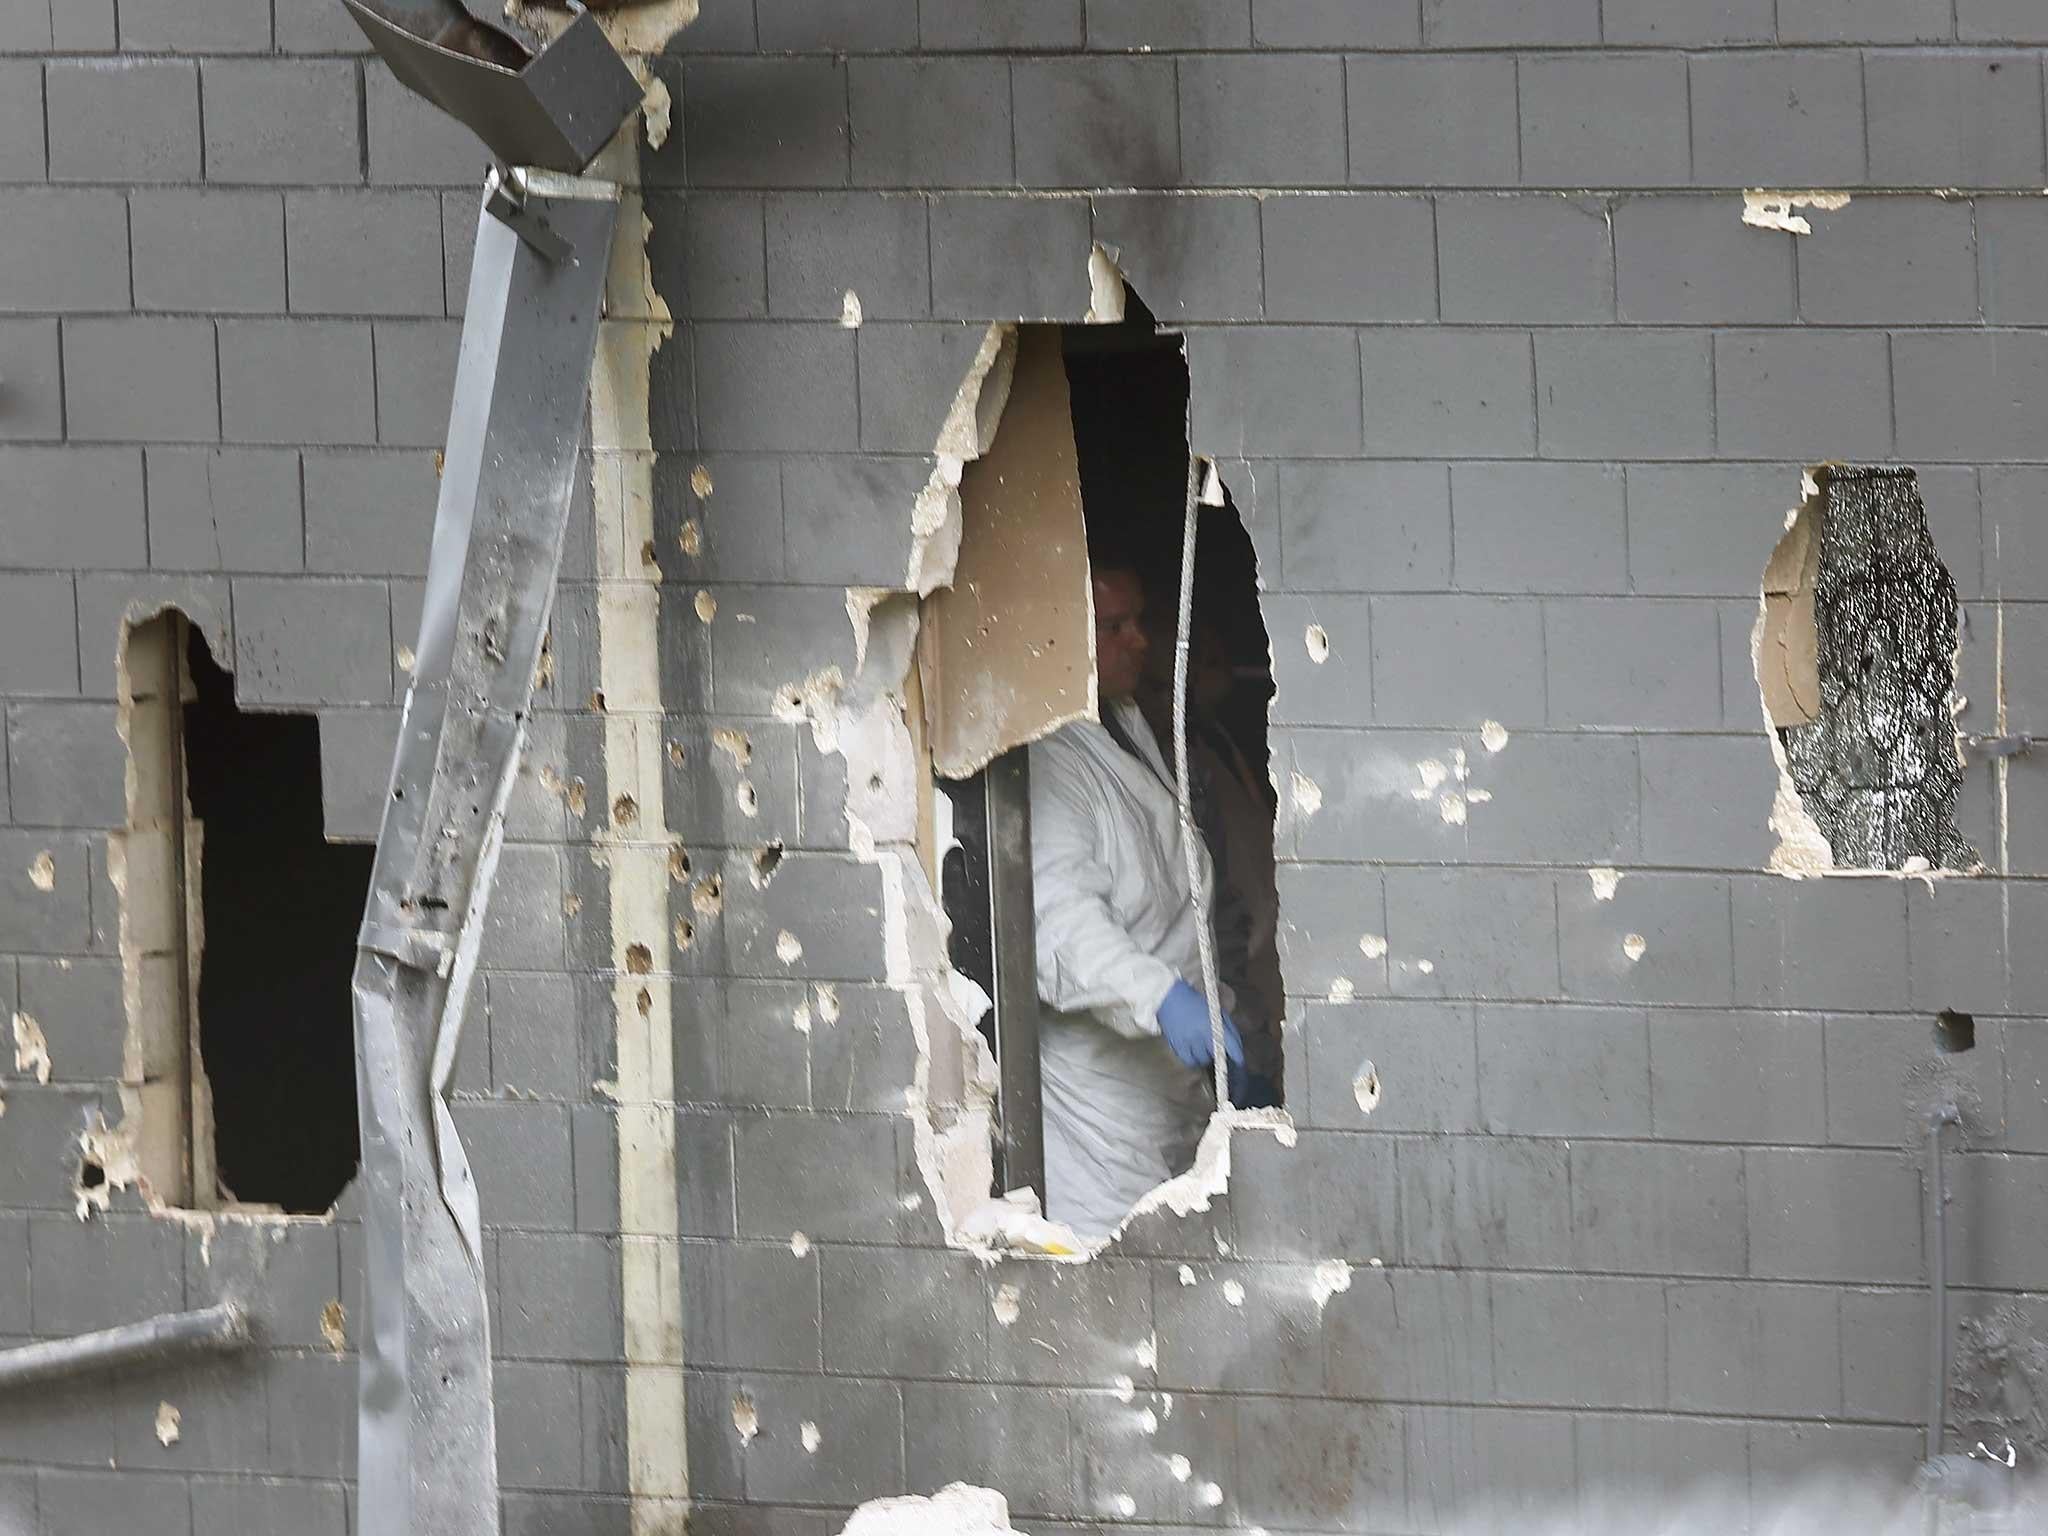 Police blew holes in the bathroom wall to free hostages